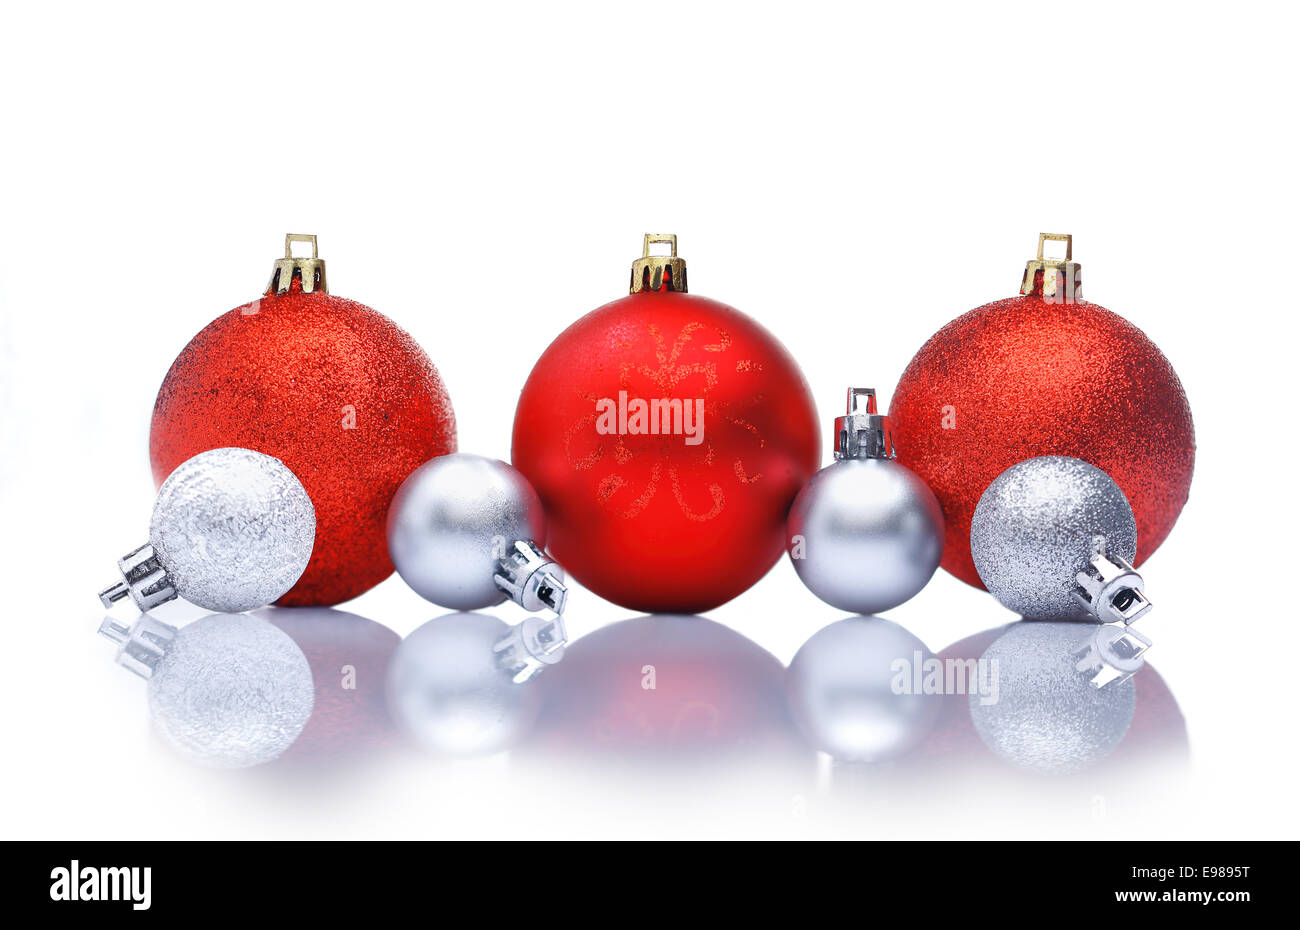 Red and silver Christmas decorations in a row with reflections and copyspace for your Christmas greetings or wishes Stock Photo